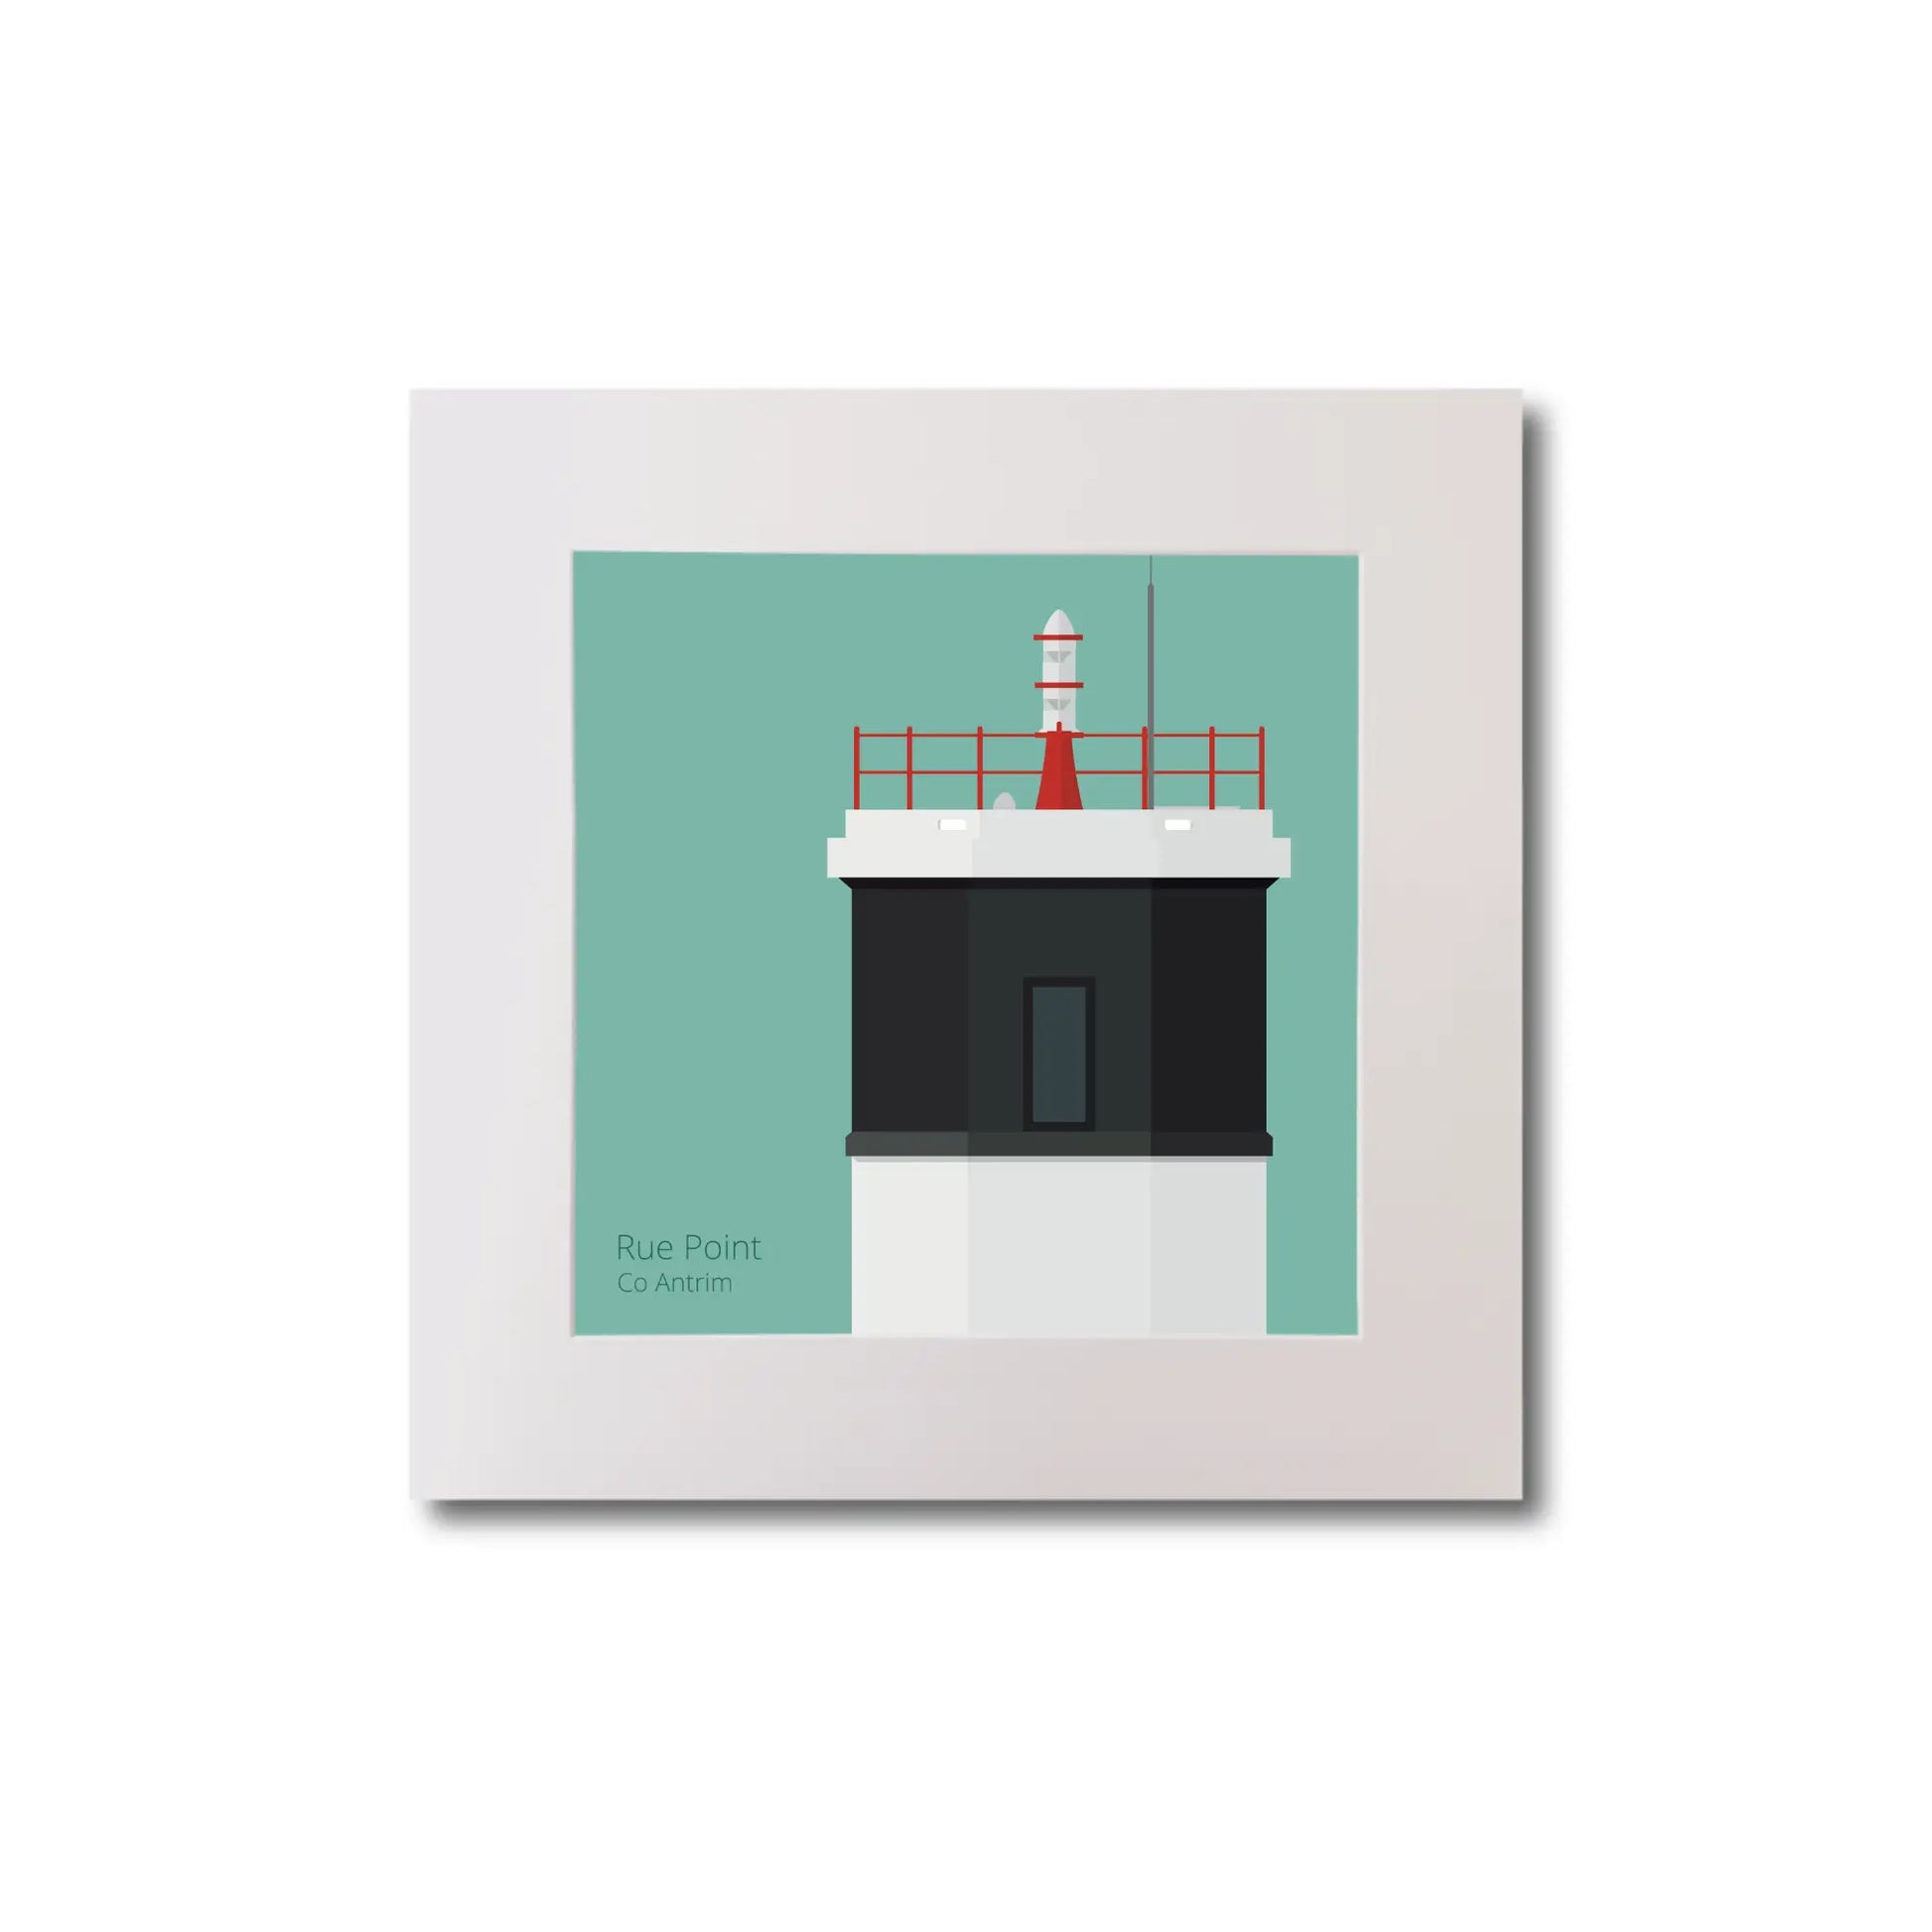 Illustration Rue_Point lighthouse on an ocean green background, mounted and measuring 20x20cm.